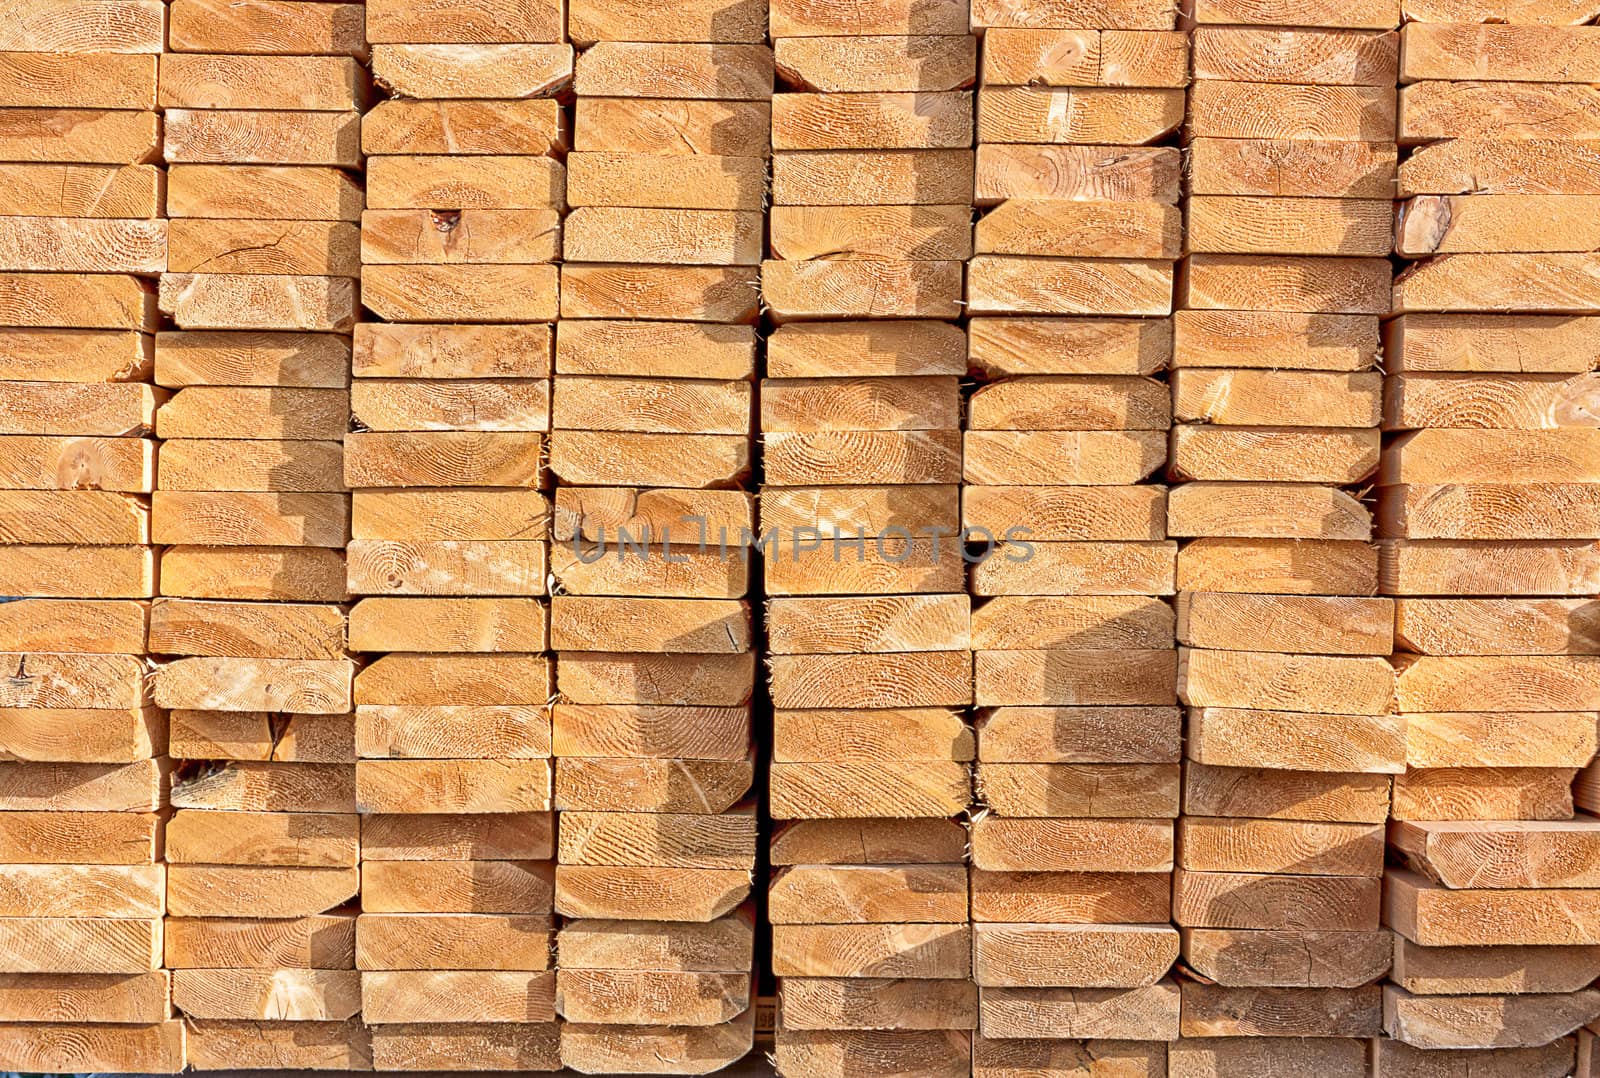 Stacked Lumber at Construction Site by wolterk